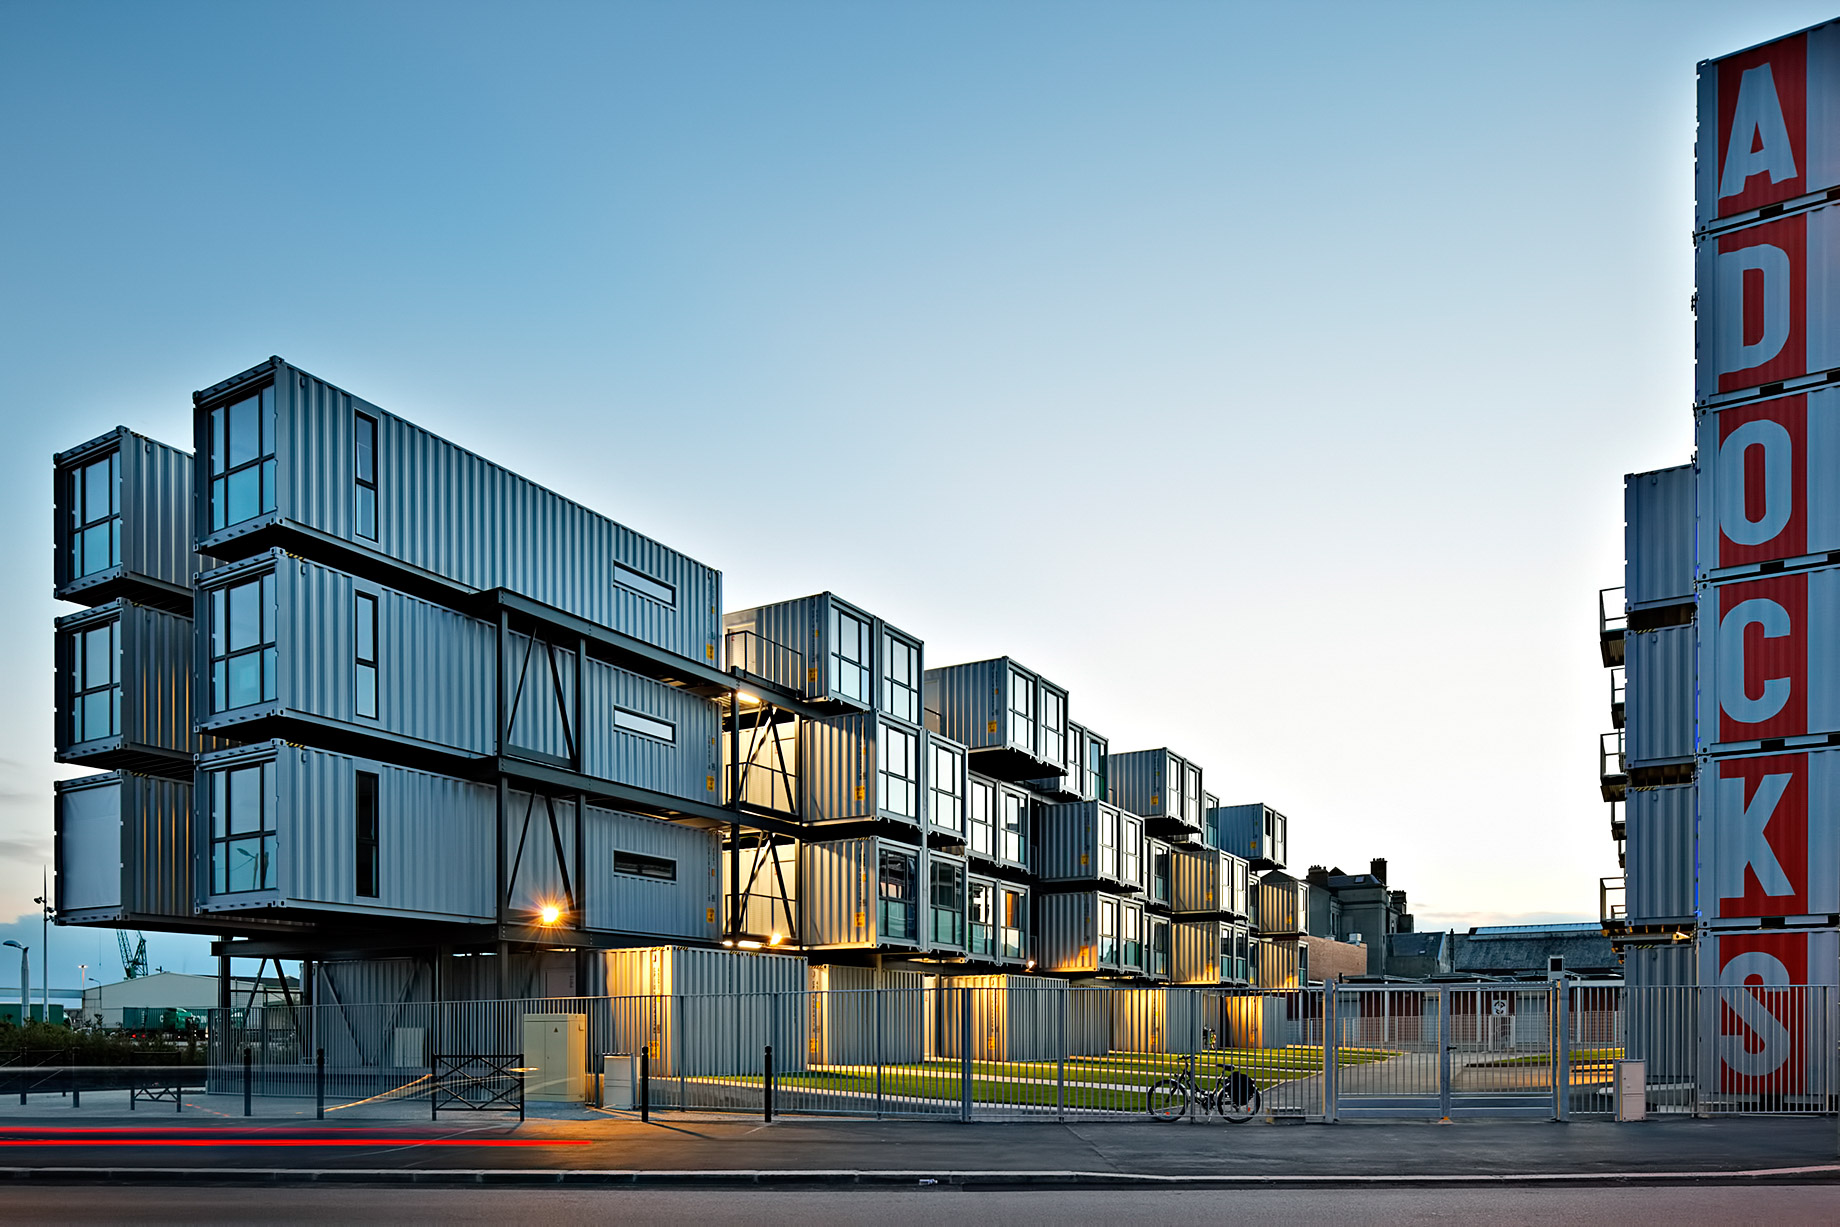 Cite a Docks in Le Havre, France - A Sustainable Block of Shipping Containers